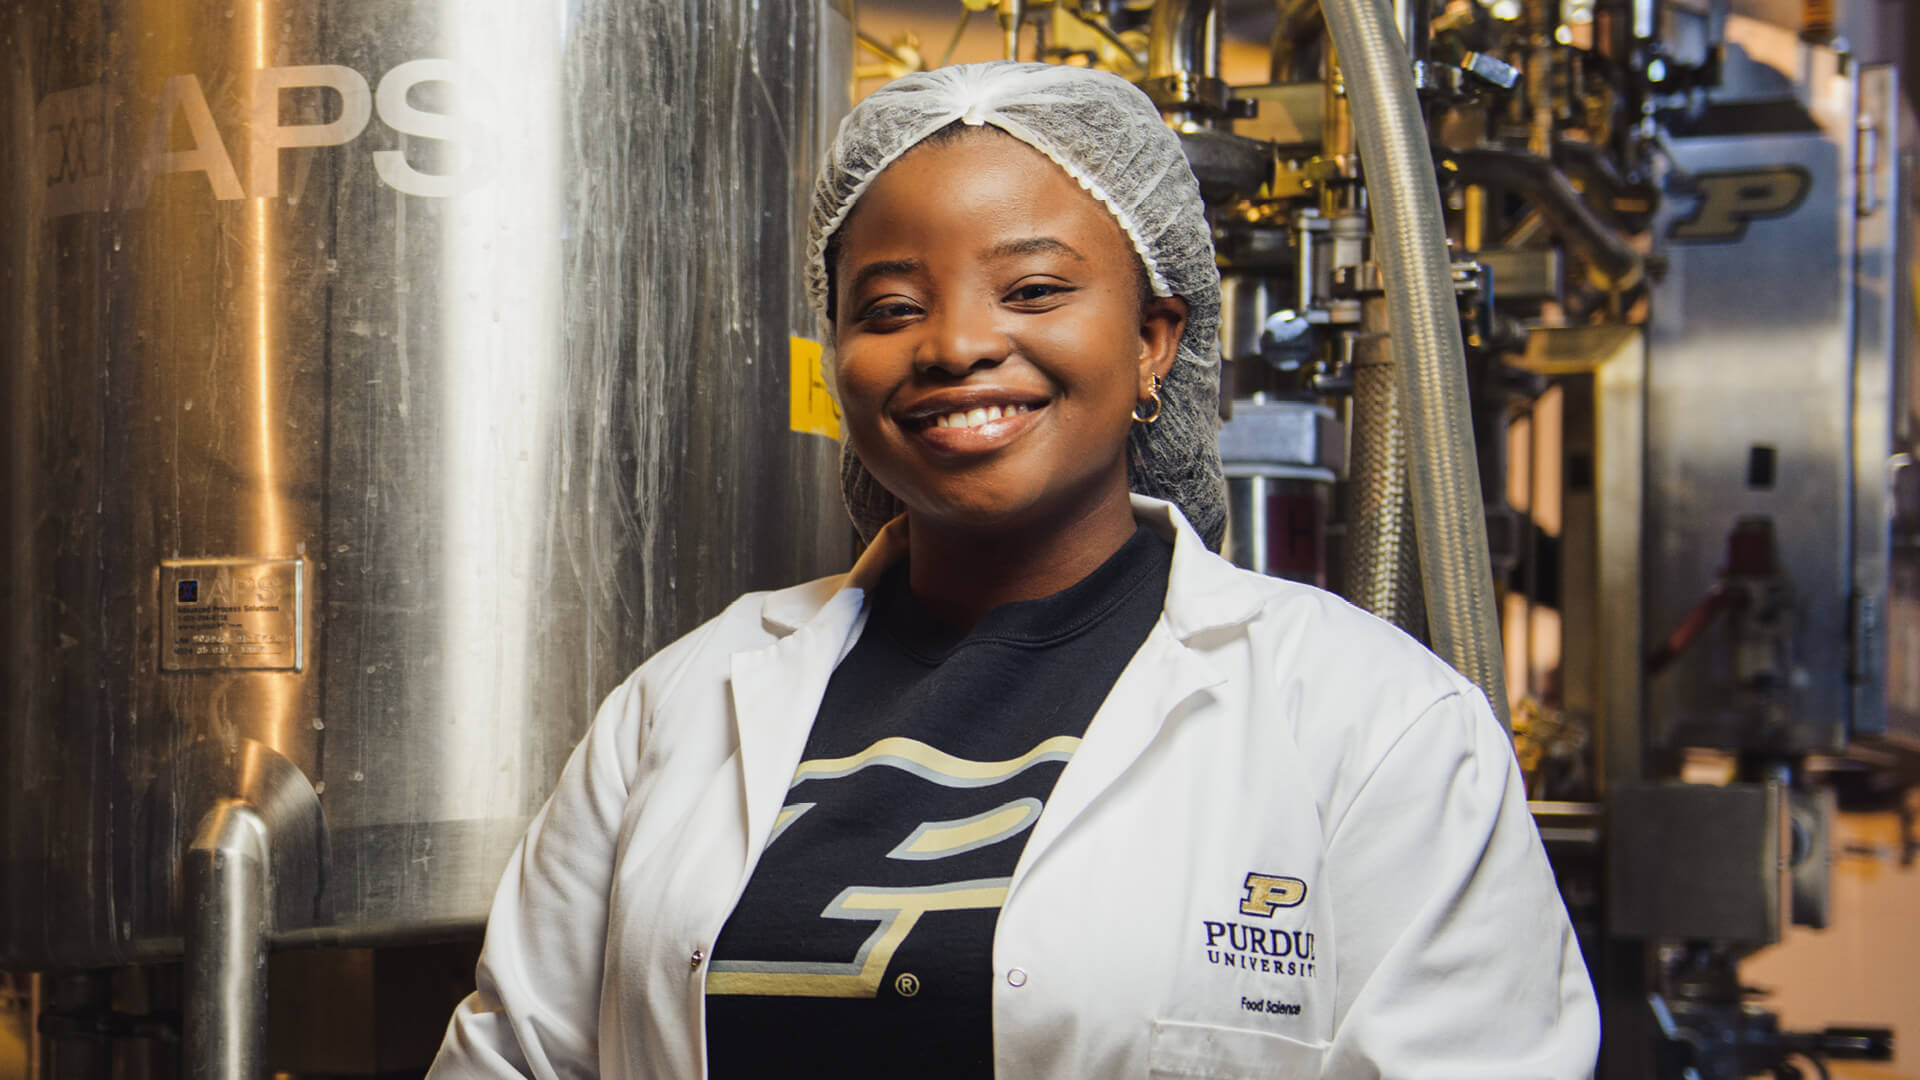 Doriane Sossou smiles at the camera, standing in a lab with metal machinery behind her.